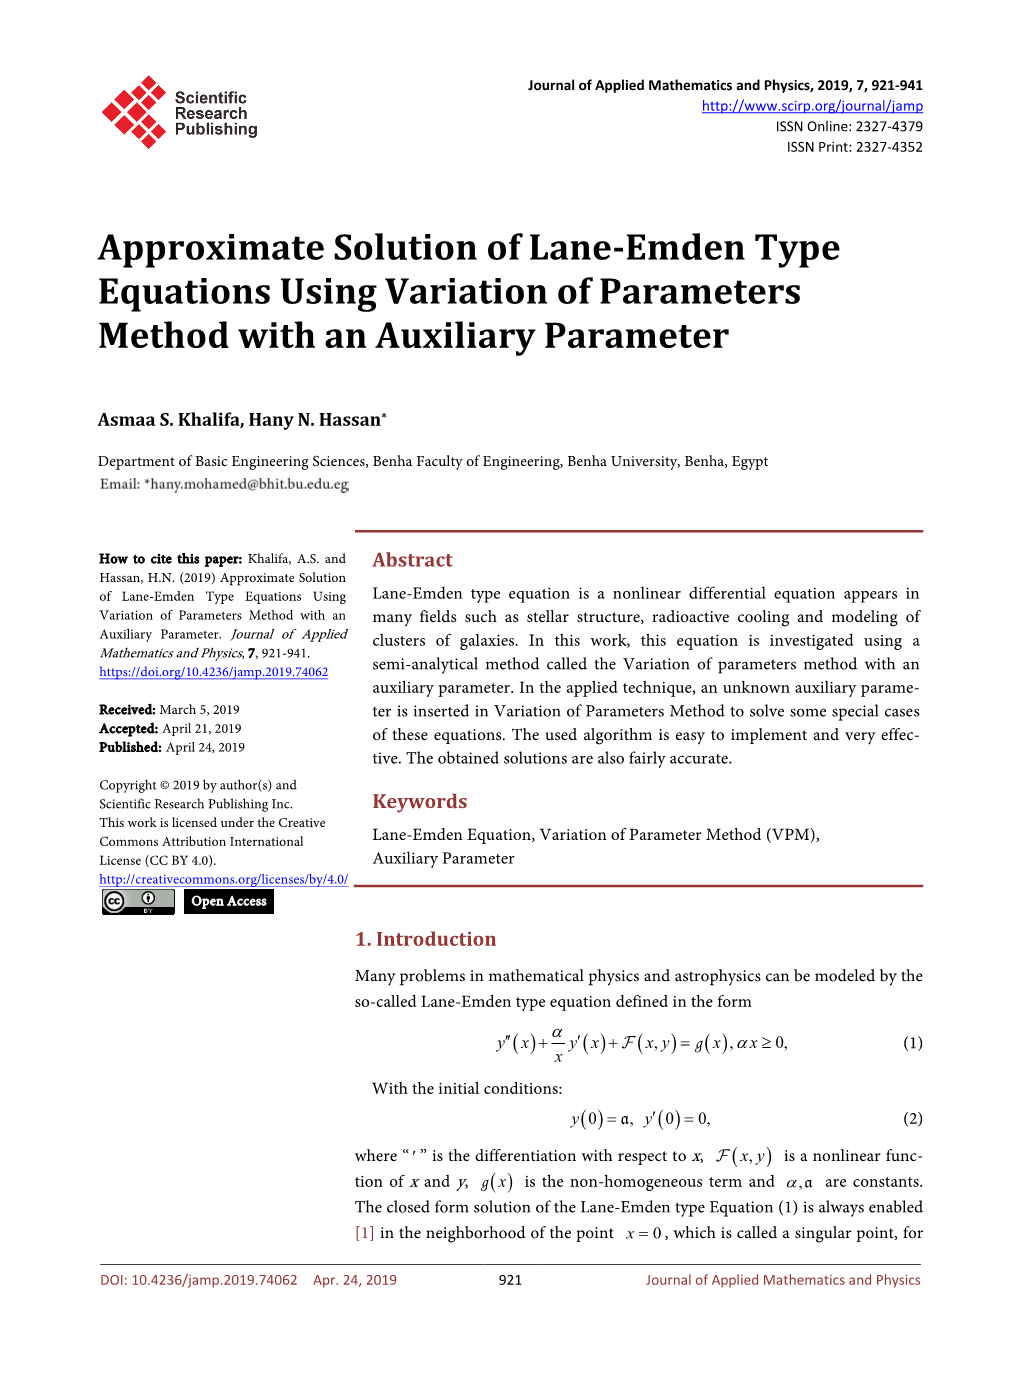 Approximate Solution of Lane-Emden Type Equations Using Variation of Parameters Method with an Auxiliary Parameter